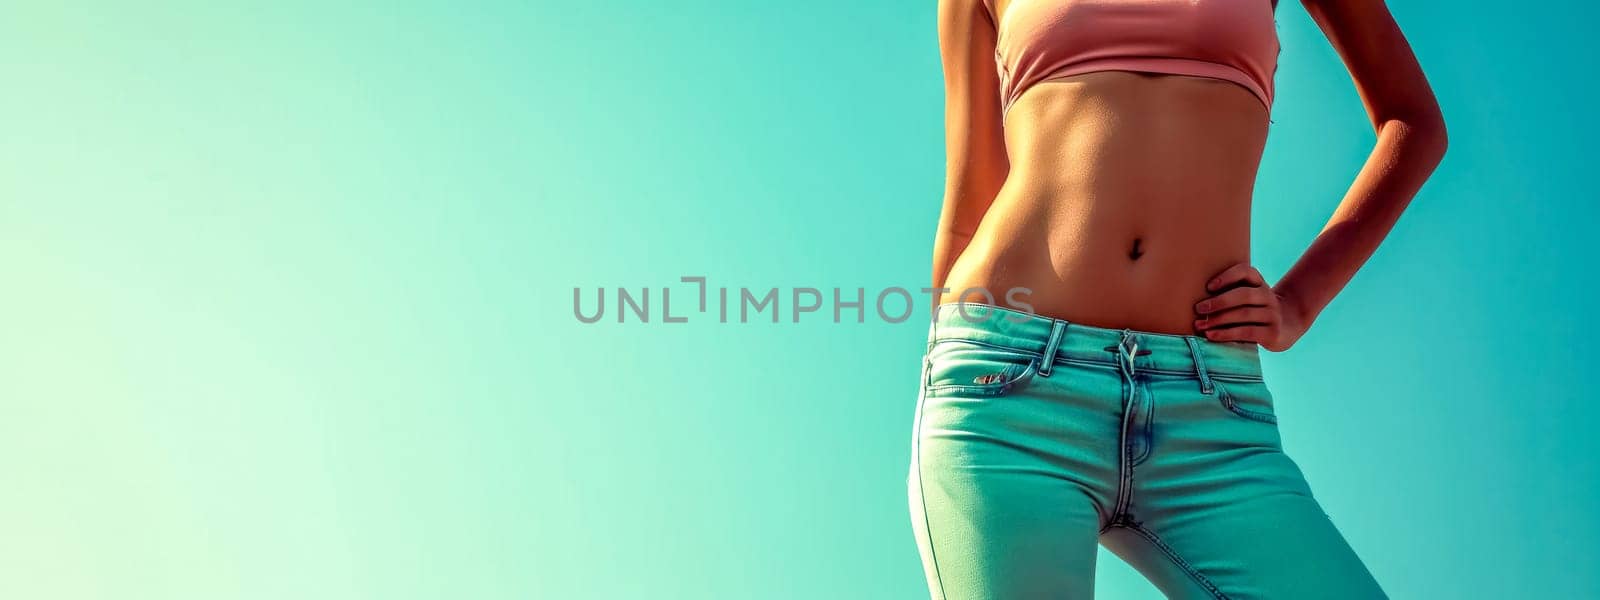 person's midsection showing a slim waist, wearing a pink crop top and light blue jeans against a turquoise background, offering a clean space for text on the right by Edophoto